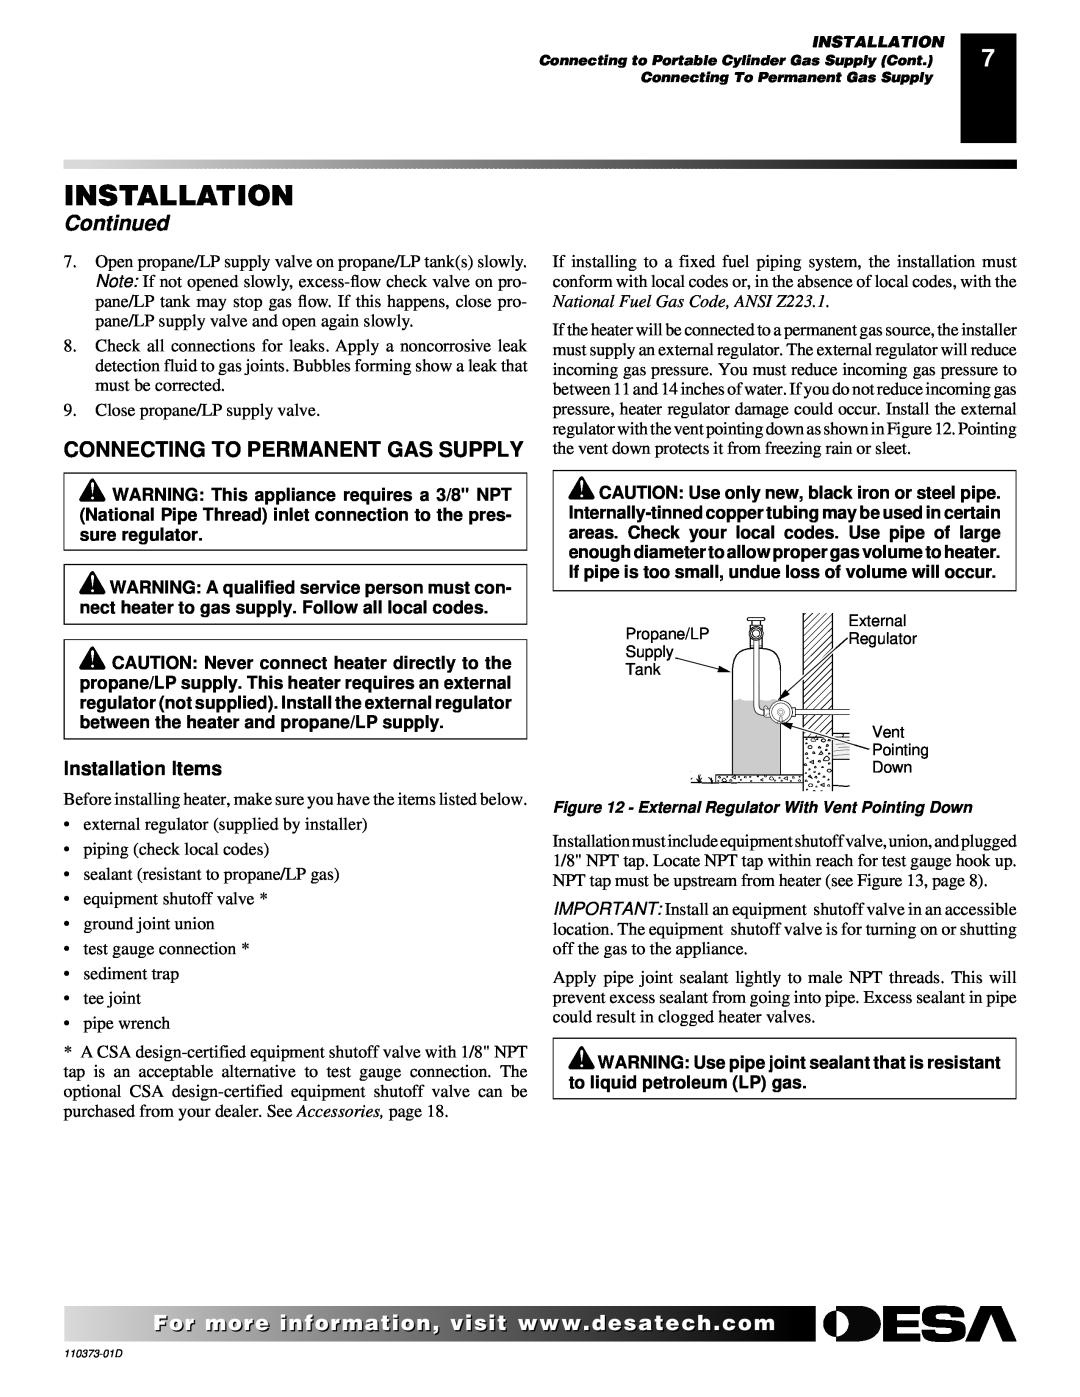 Desa REM10PT RH10PT installation manual Continued, Connecting To Permanent Gas Supply, Installation Items 